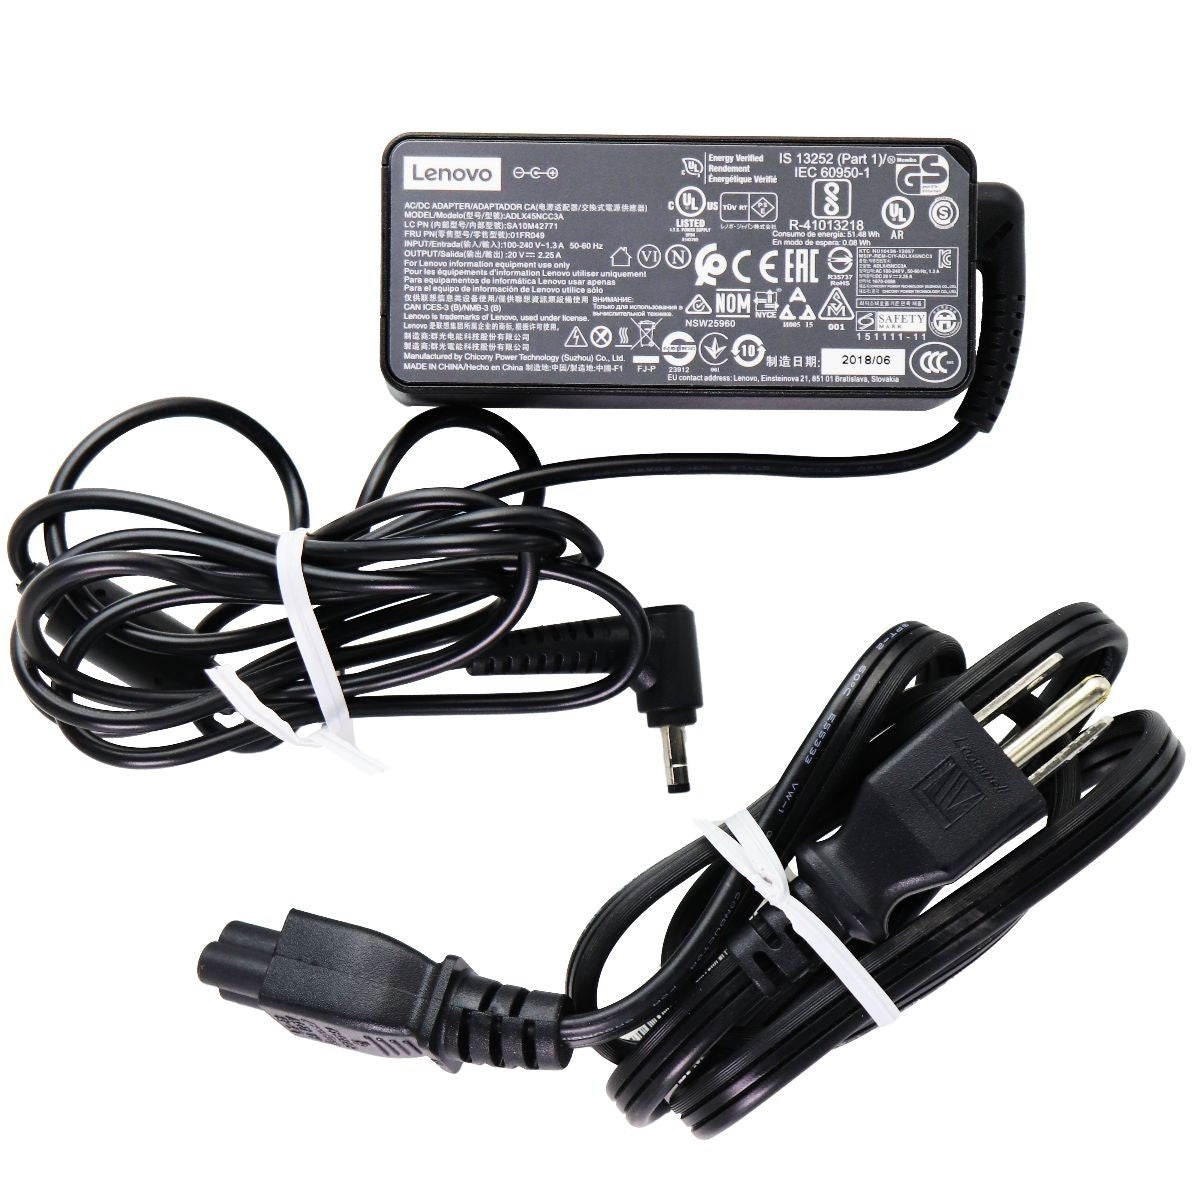 Lenovo OEM AC/DC Power Adapter With Small Plug - Black (ADLX45NCC3A) Computer Accessories - Laptop Power Adapters/Chargers Lenovo    - Simple Cell Bulk Wholesale Pricing - USA Seller